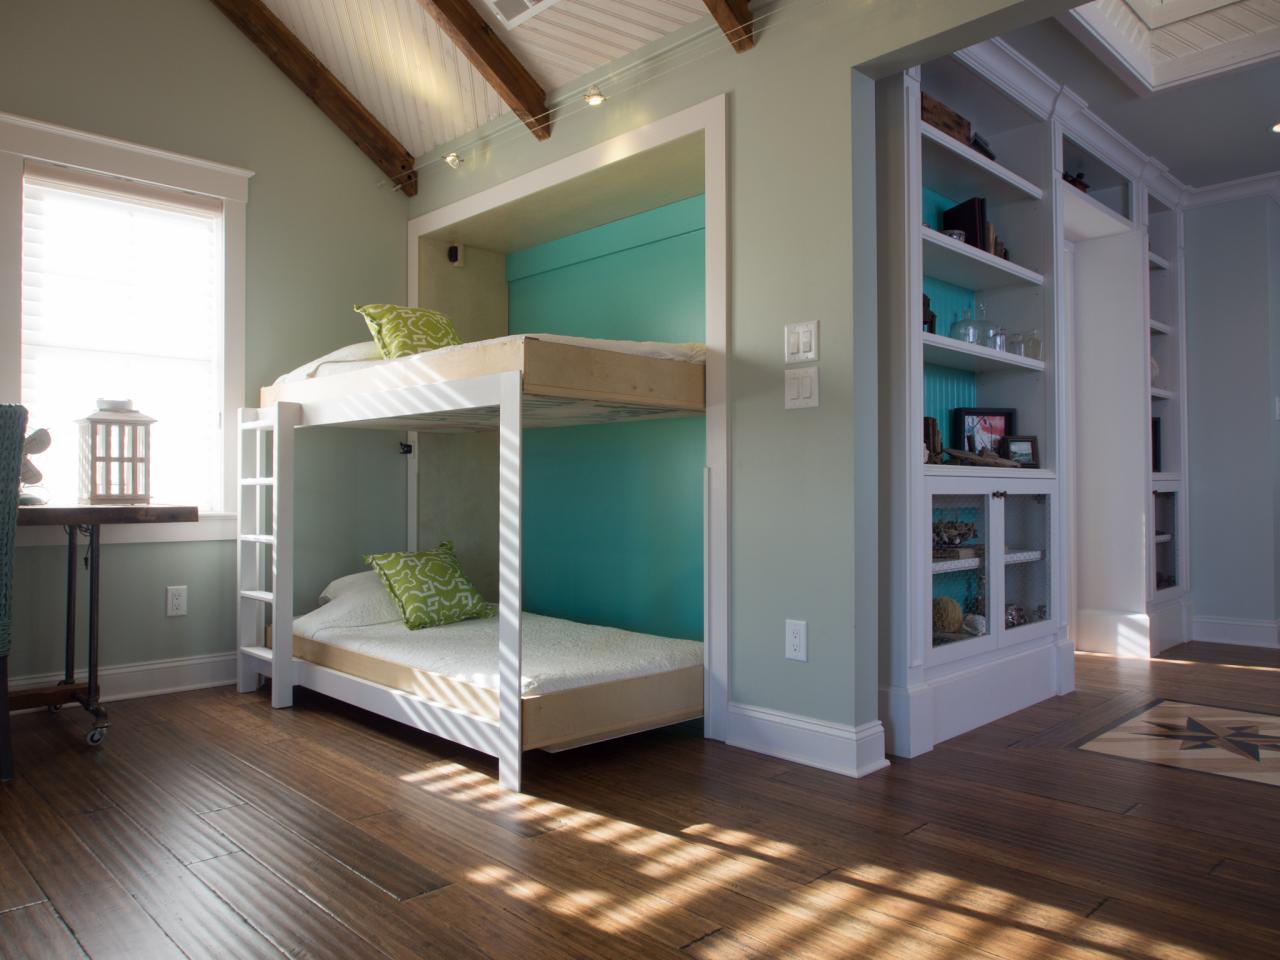 Build A Side Fold Murphy Bunk Bed, How To Make Hanging Bunk Beds